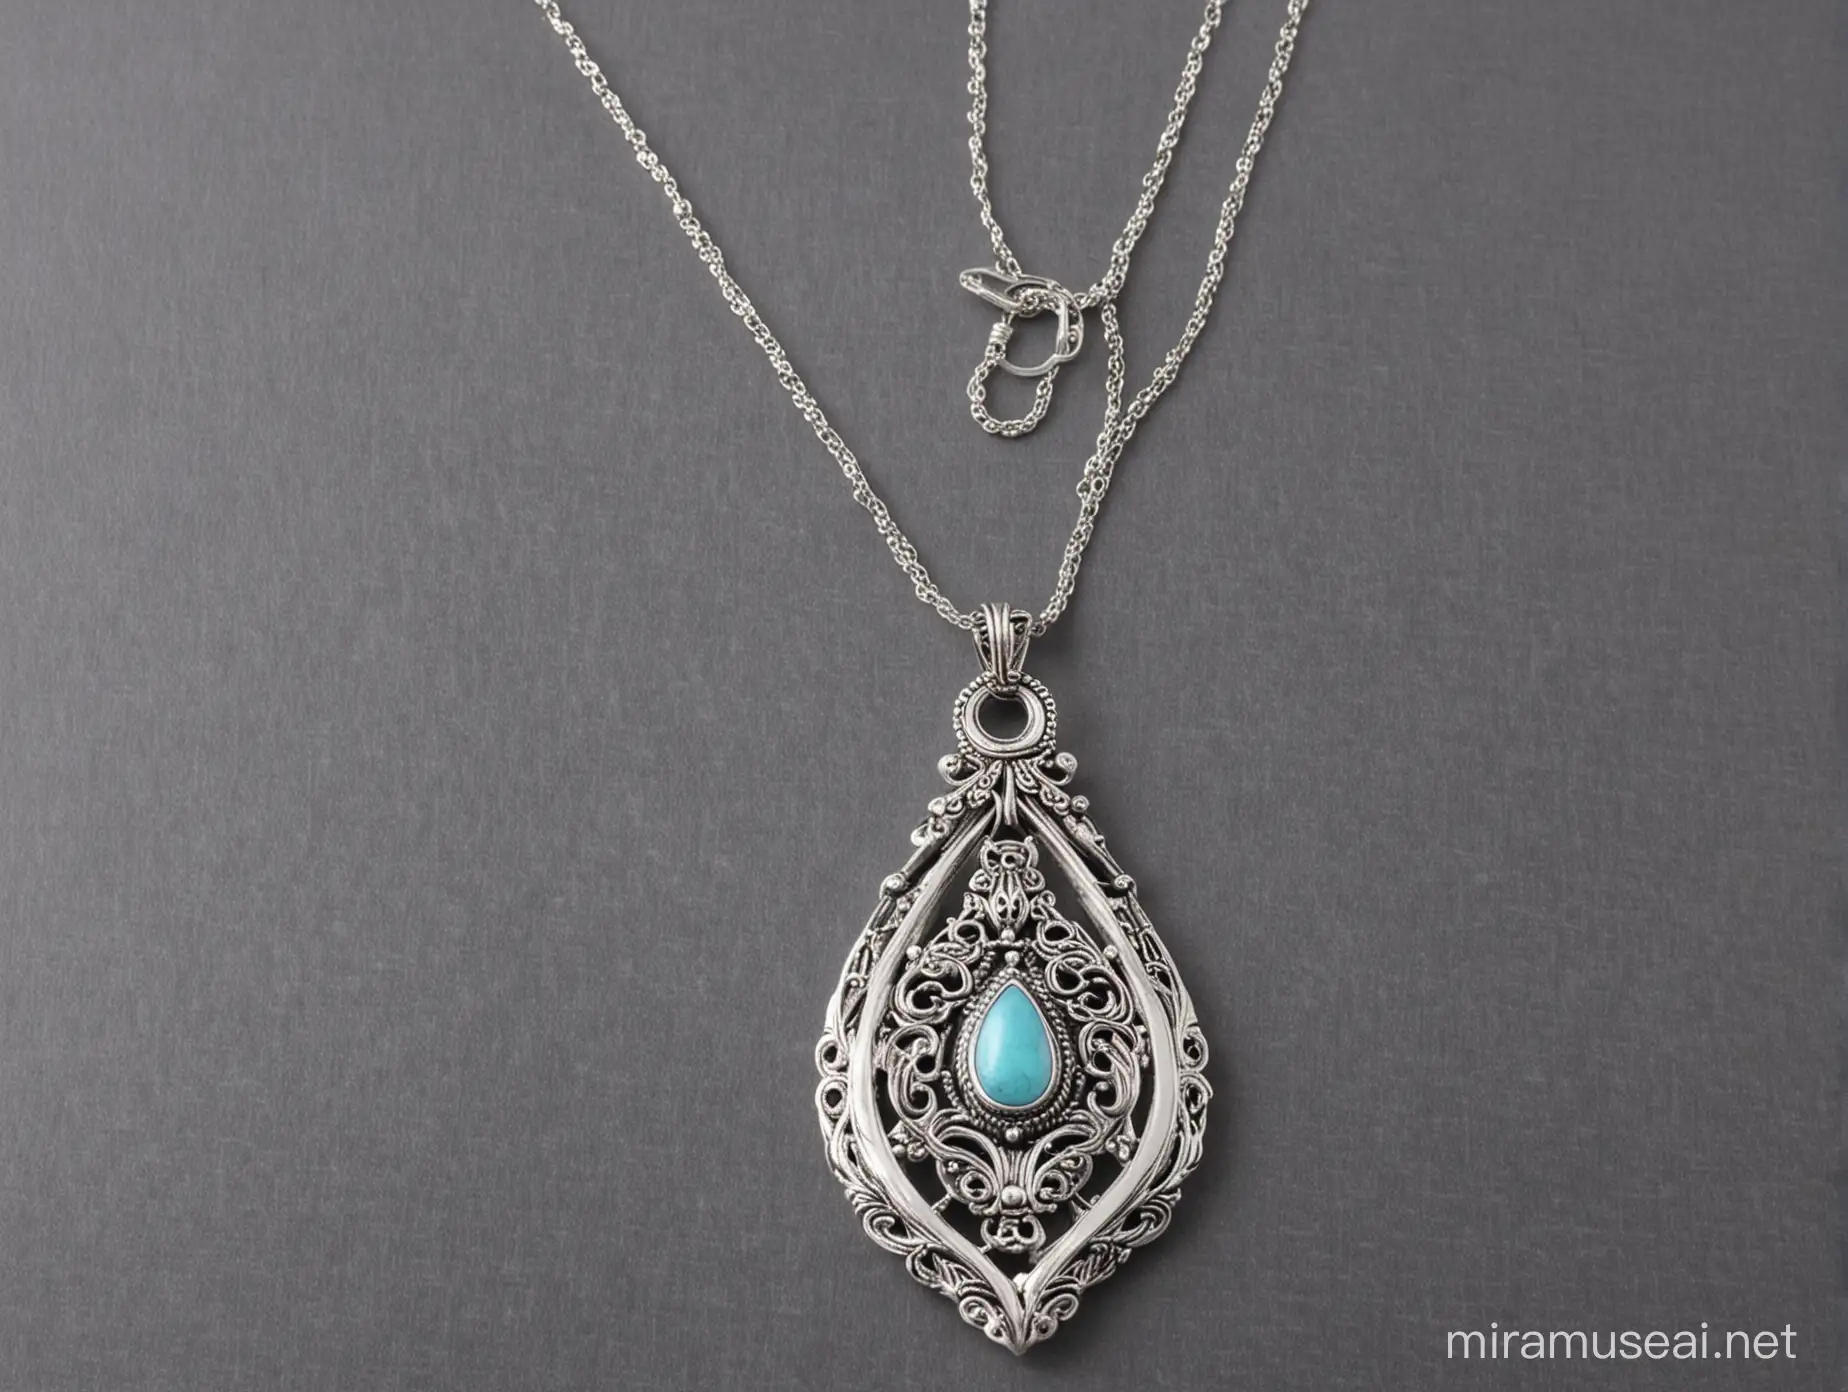 Exploring the History and Symbolism of Long Silver Pendant Necklaces